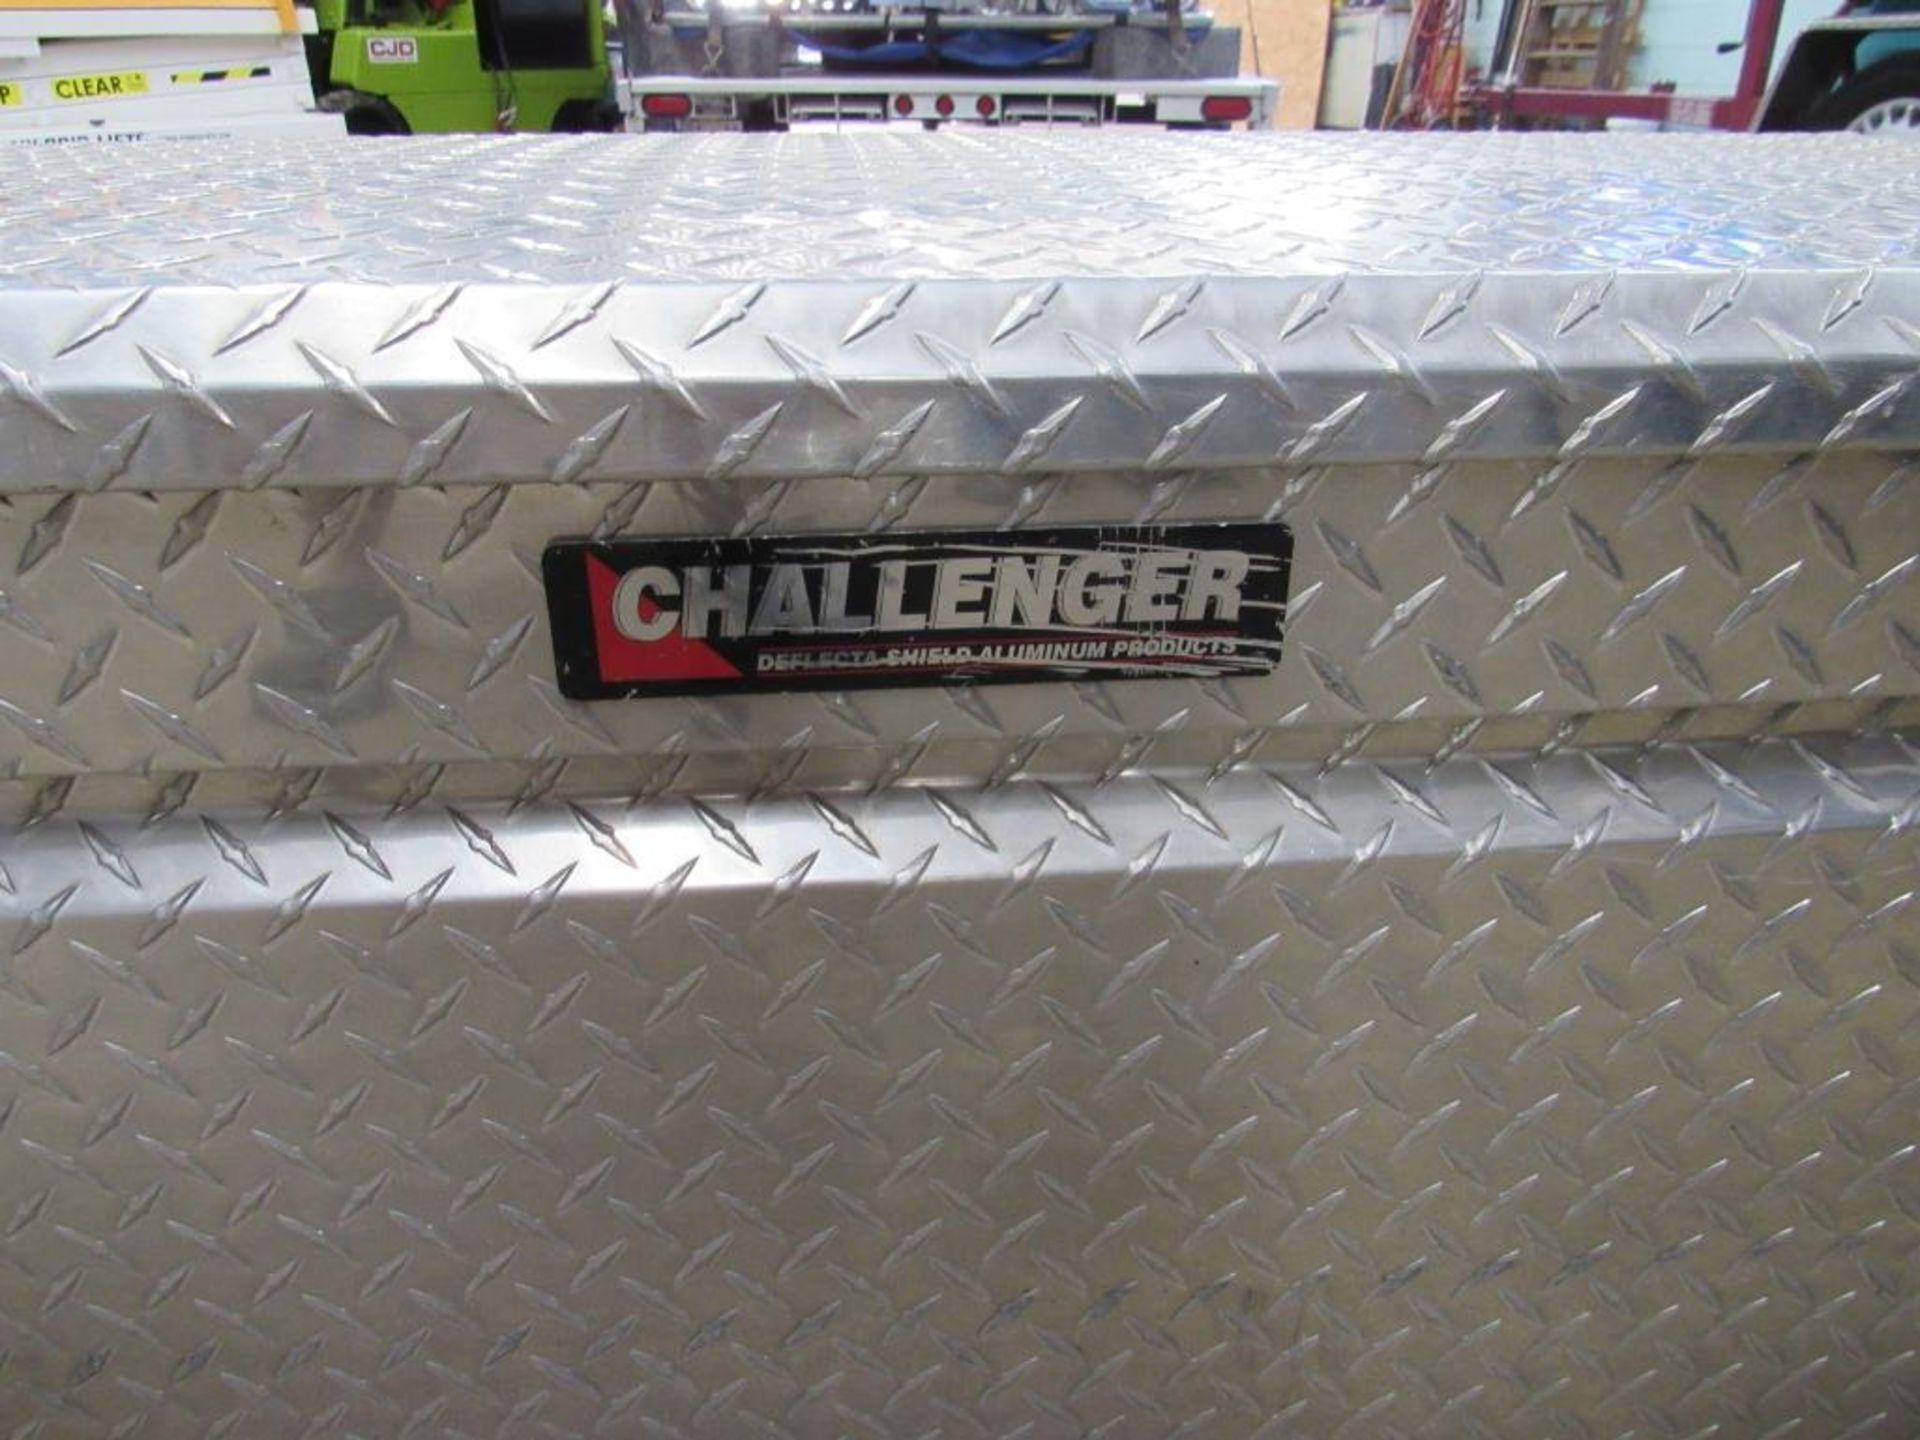 CHALLENGE Aluminum Truck Bed Tool Box 4 ft. x 20 in. x 20 in. - Image 4 of 4